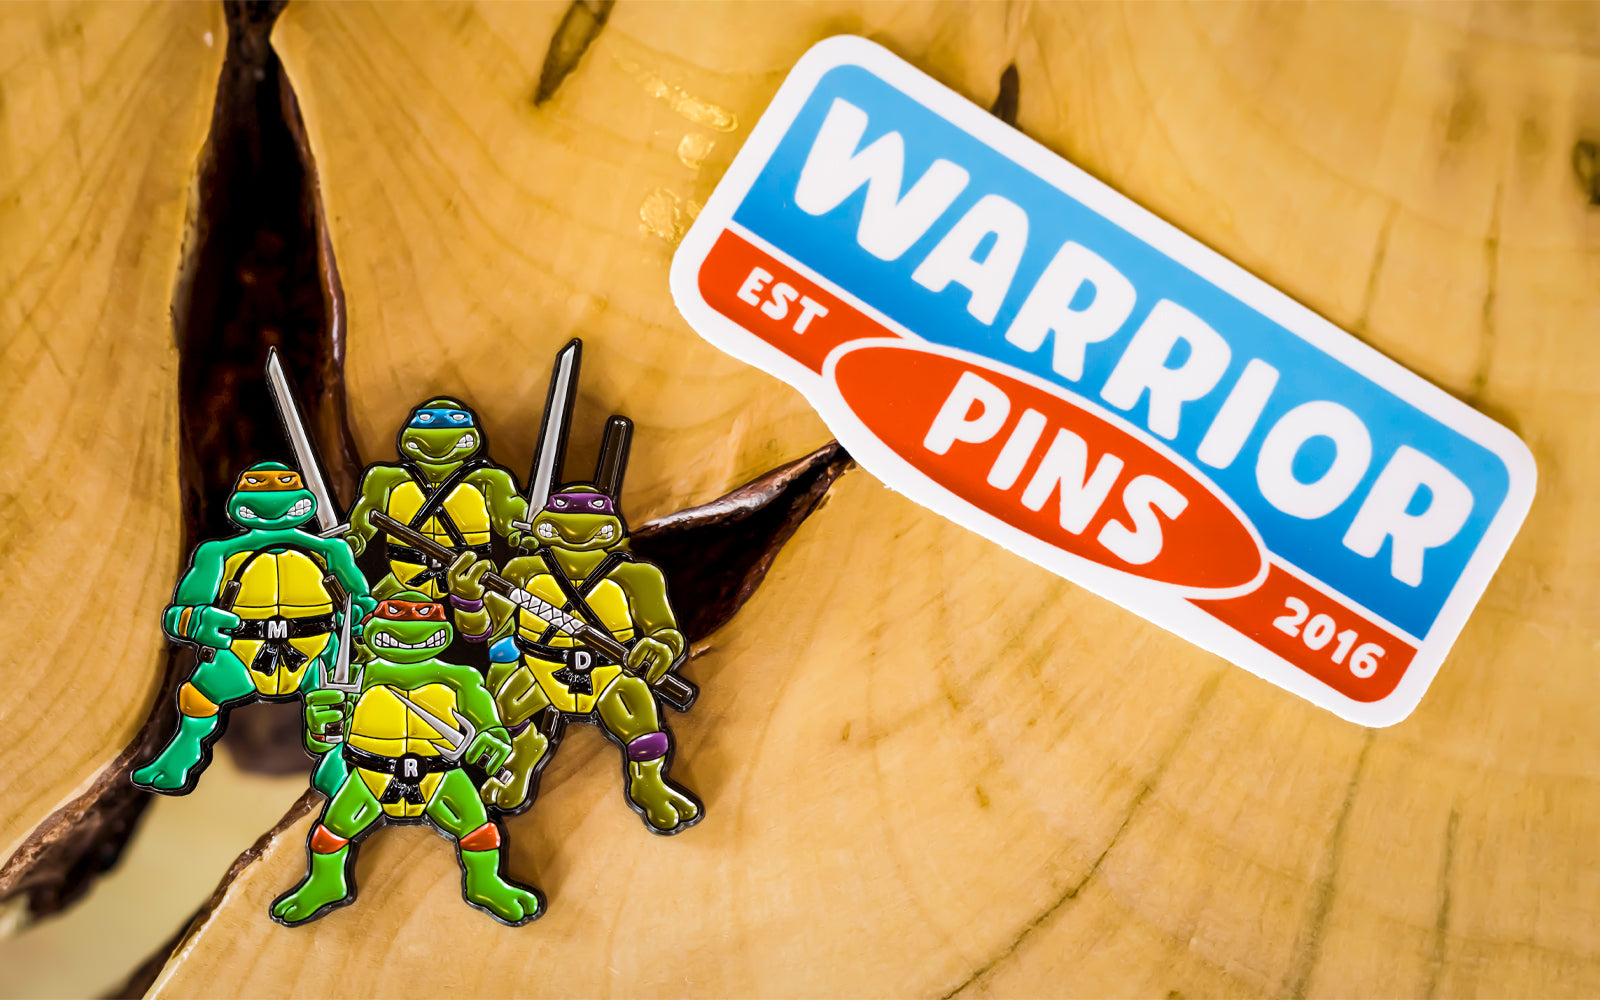 3 Things To Keep In Mind When Starting an Enamel Pin Business